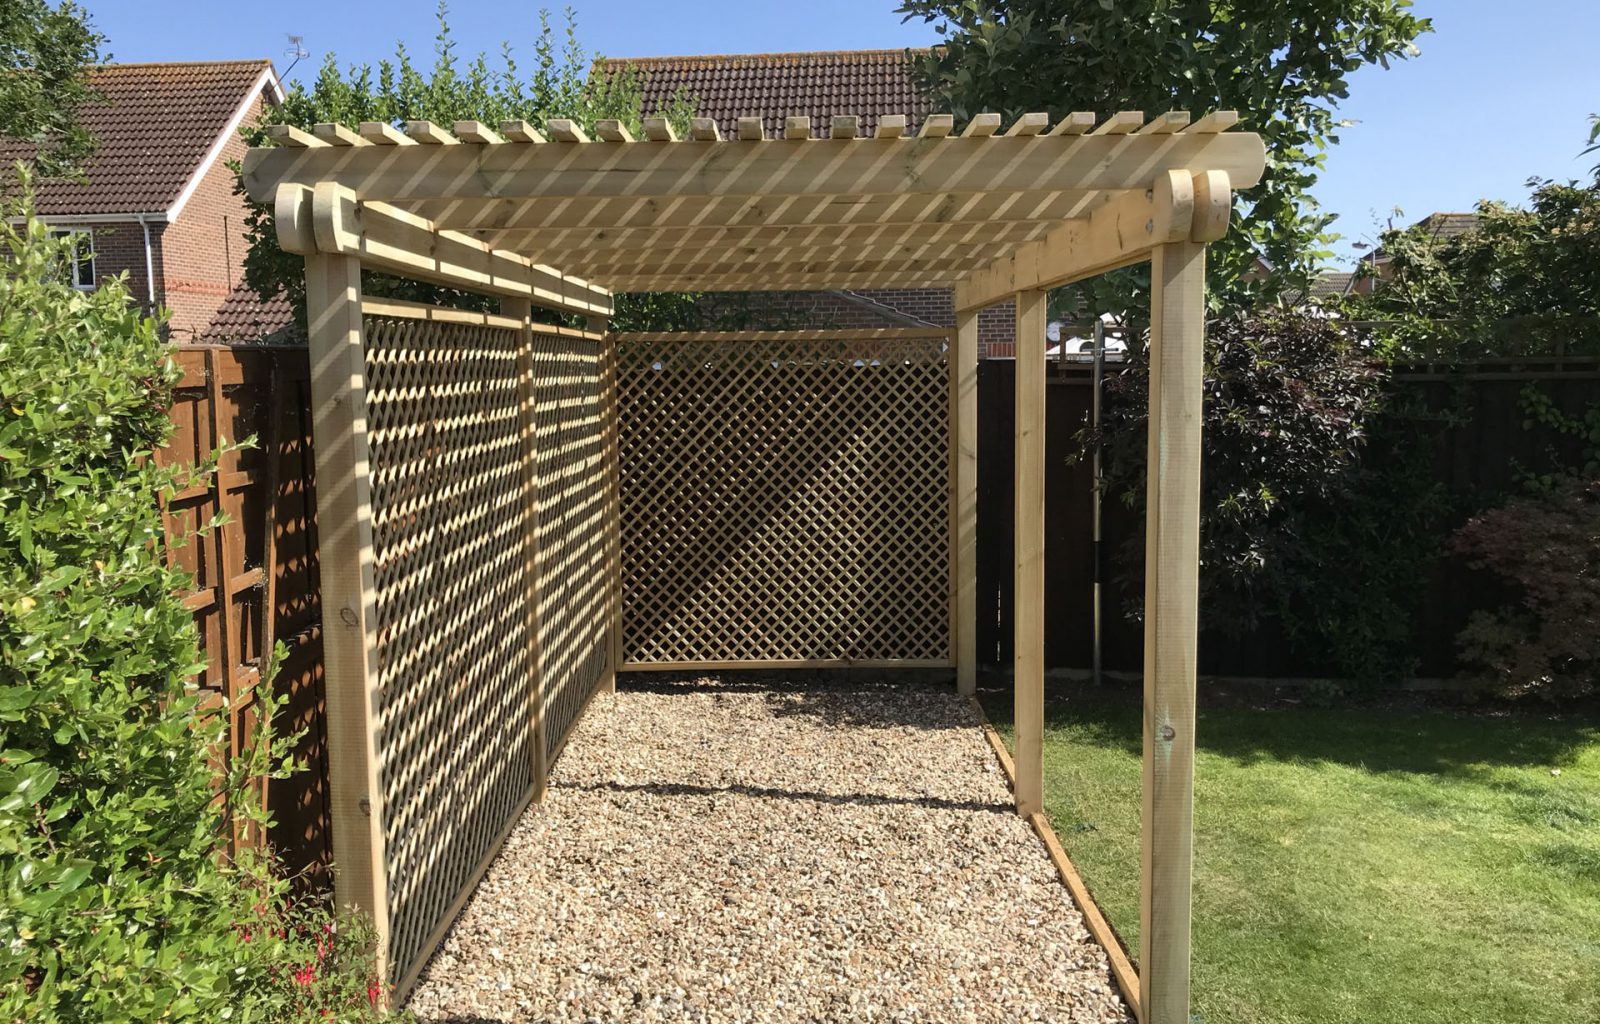 Wooden pergola with side trellis panels over a gravel base for garden seating